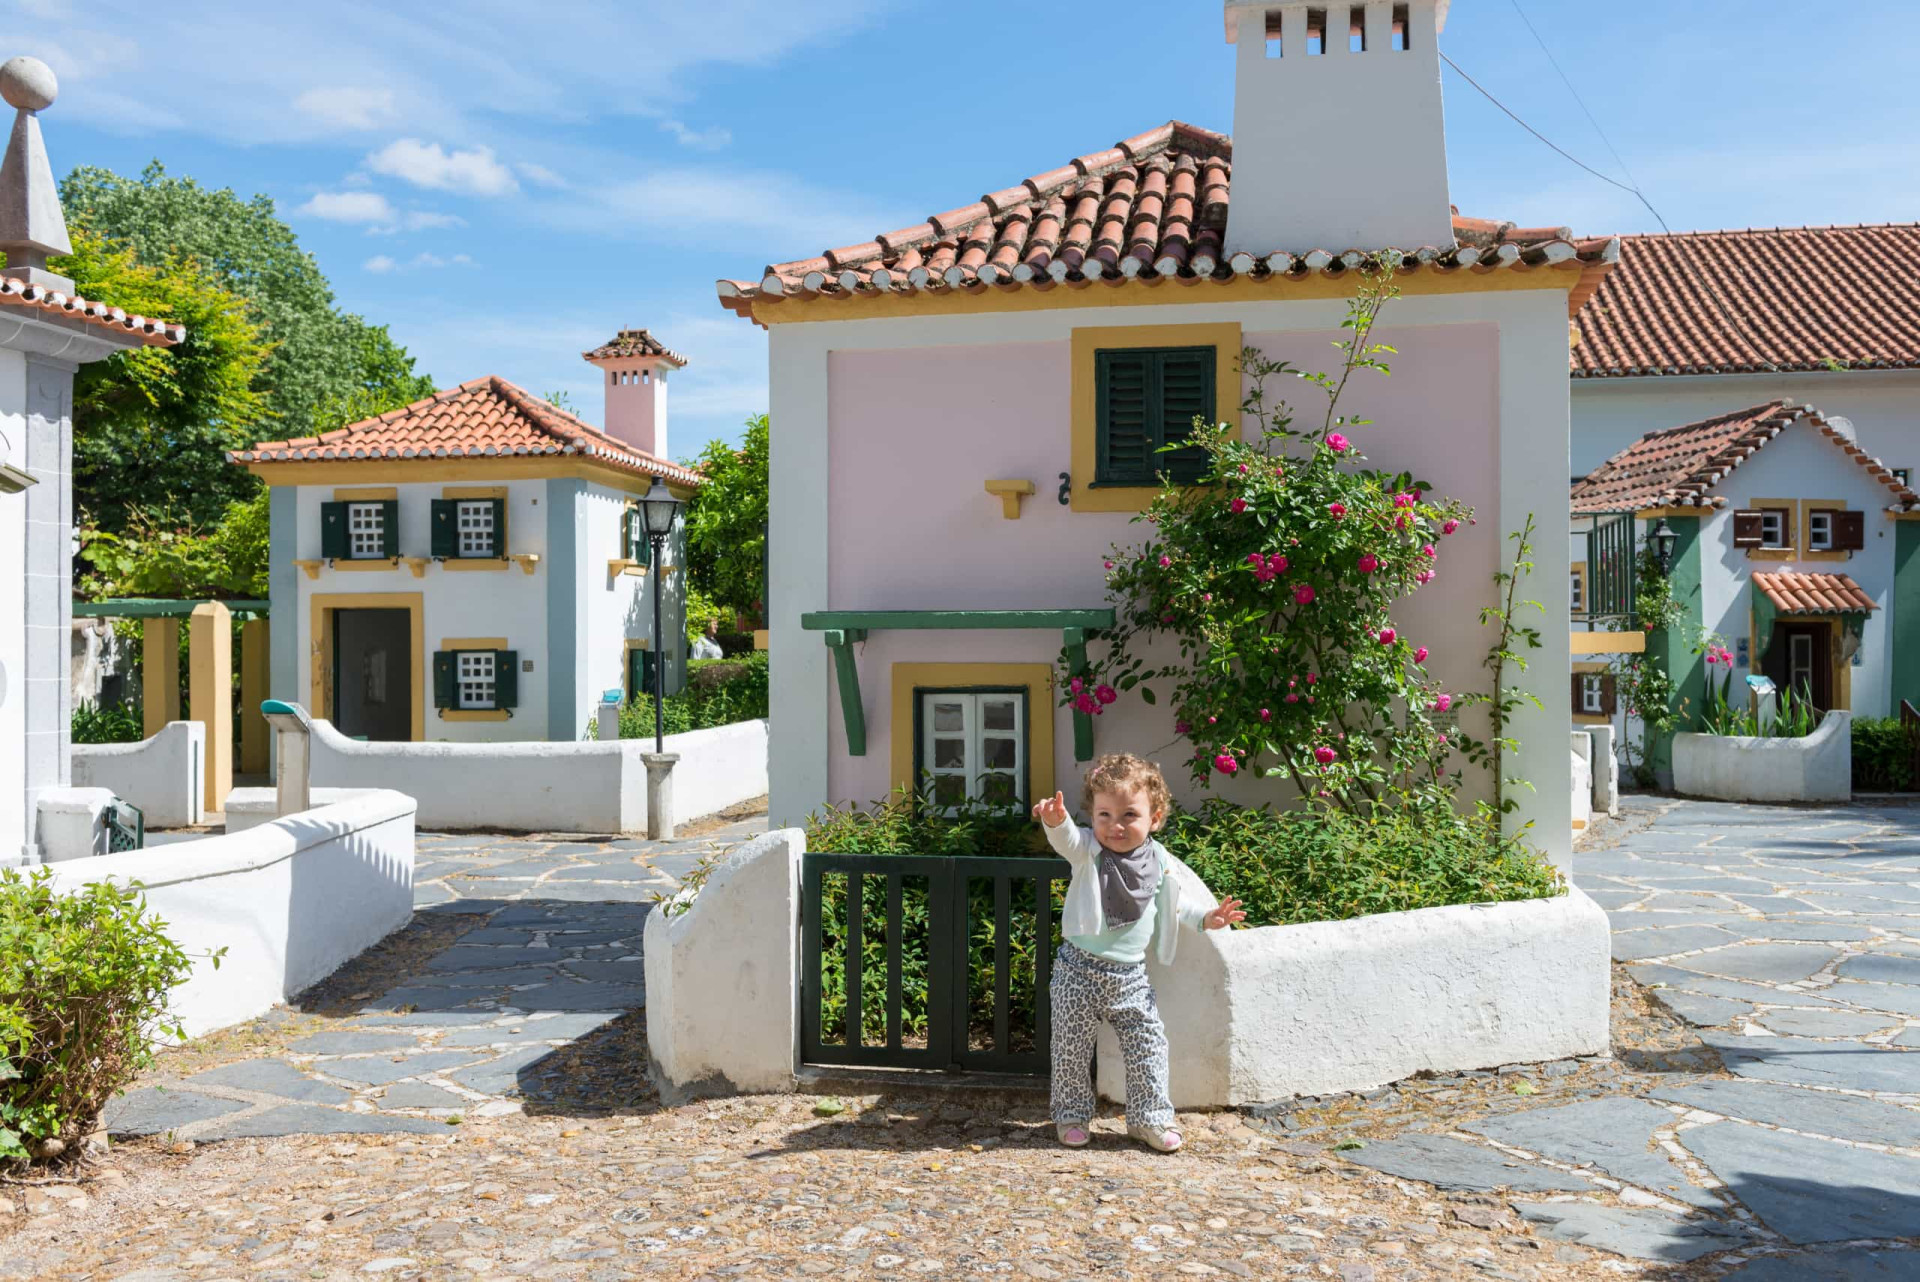 <p>Still flying under the travel radar compared to busy Portuguese cities like <a href="https://www.starsinsider.com/travel/460434/exploring-porto-and-the-douro-valley" rel="noopener">Porto</a> and Lisbon, Coimbra is perfect for kids. Sunny plazas, riverside parks and gardens, walkable cobbled streets, and there's even a theme park featuring child-size versions of Portuguese cities and attractions. </p>